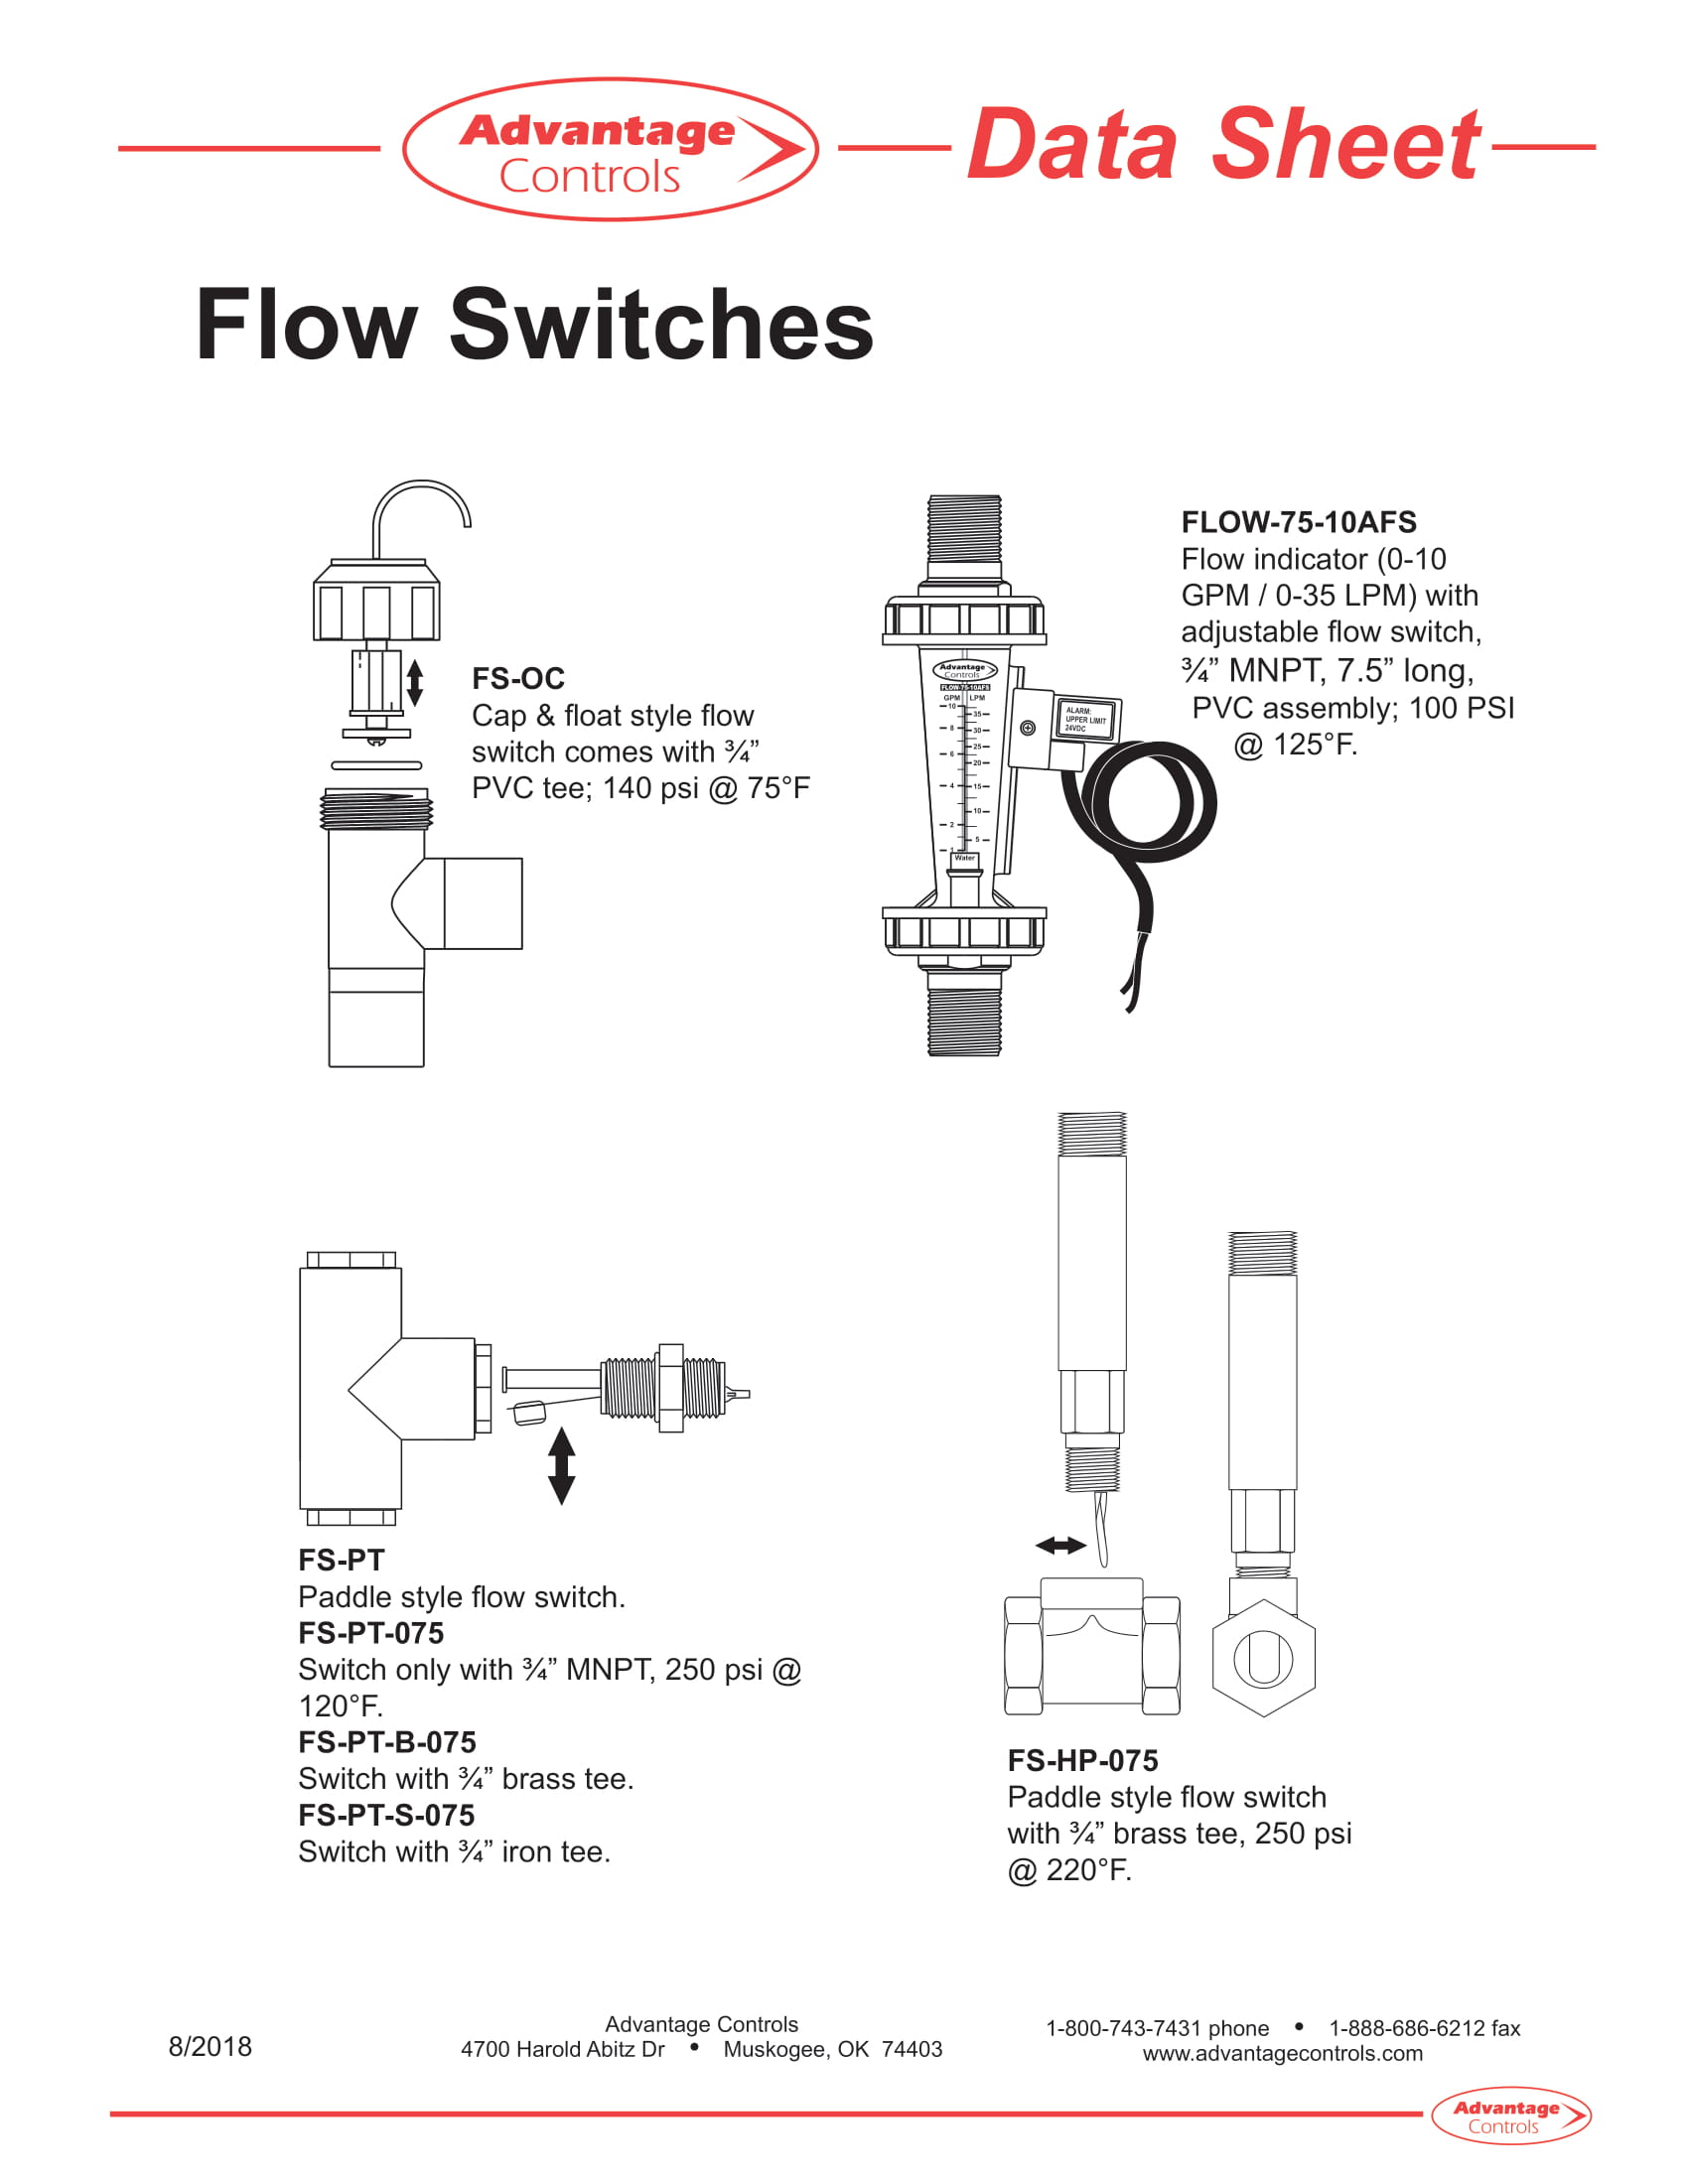 flow switches for cooling towers